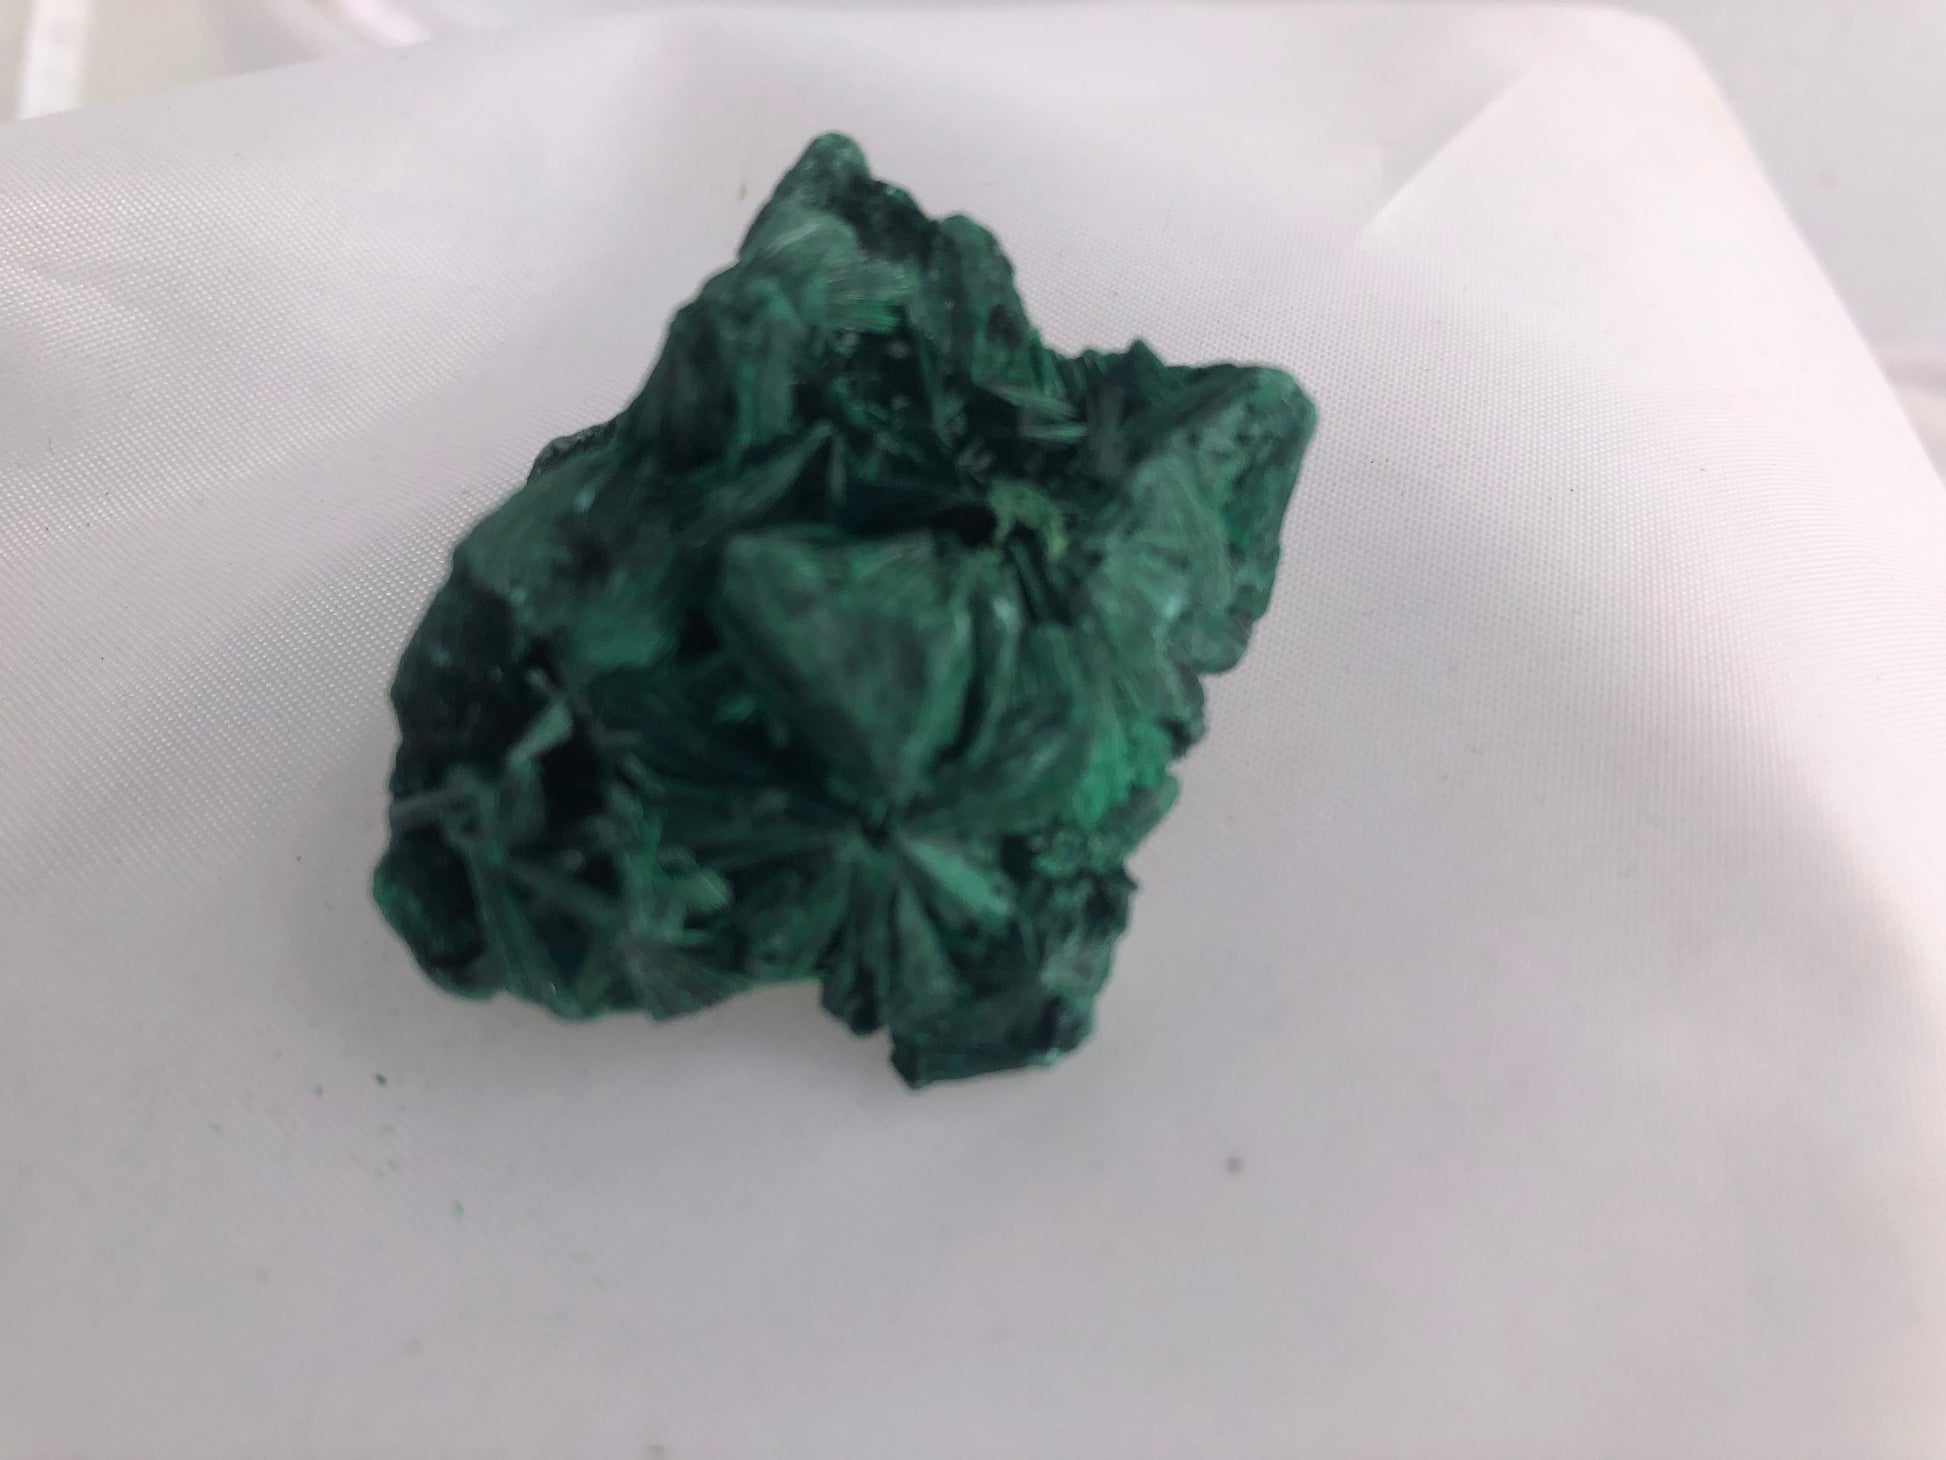 Fibrous Malachite 16 - Congo | Of Coins & Crystals